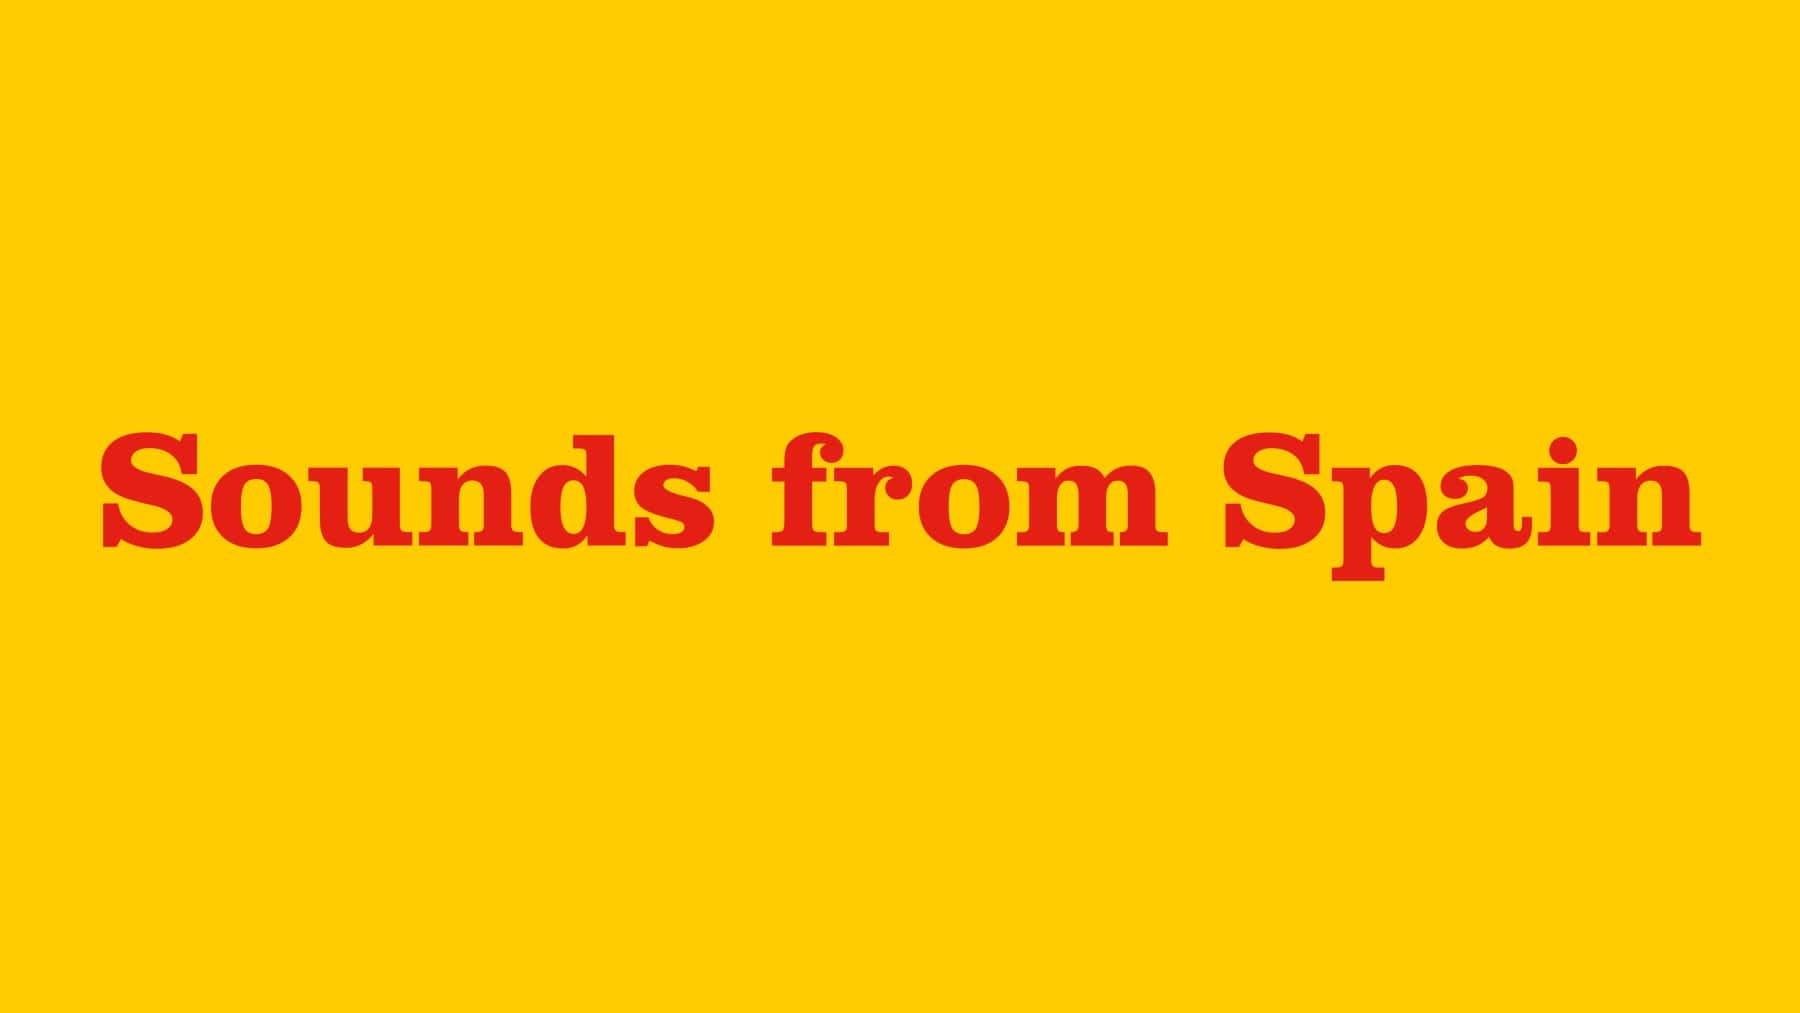 Sounds from Spain